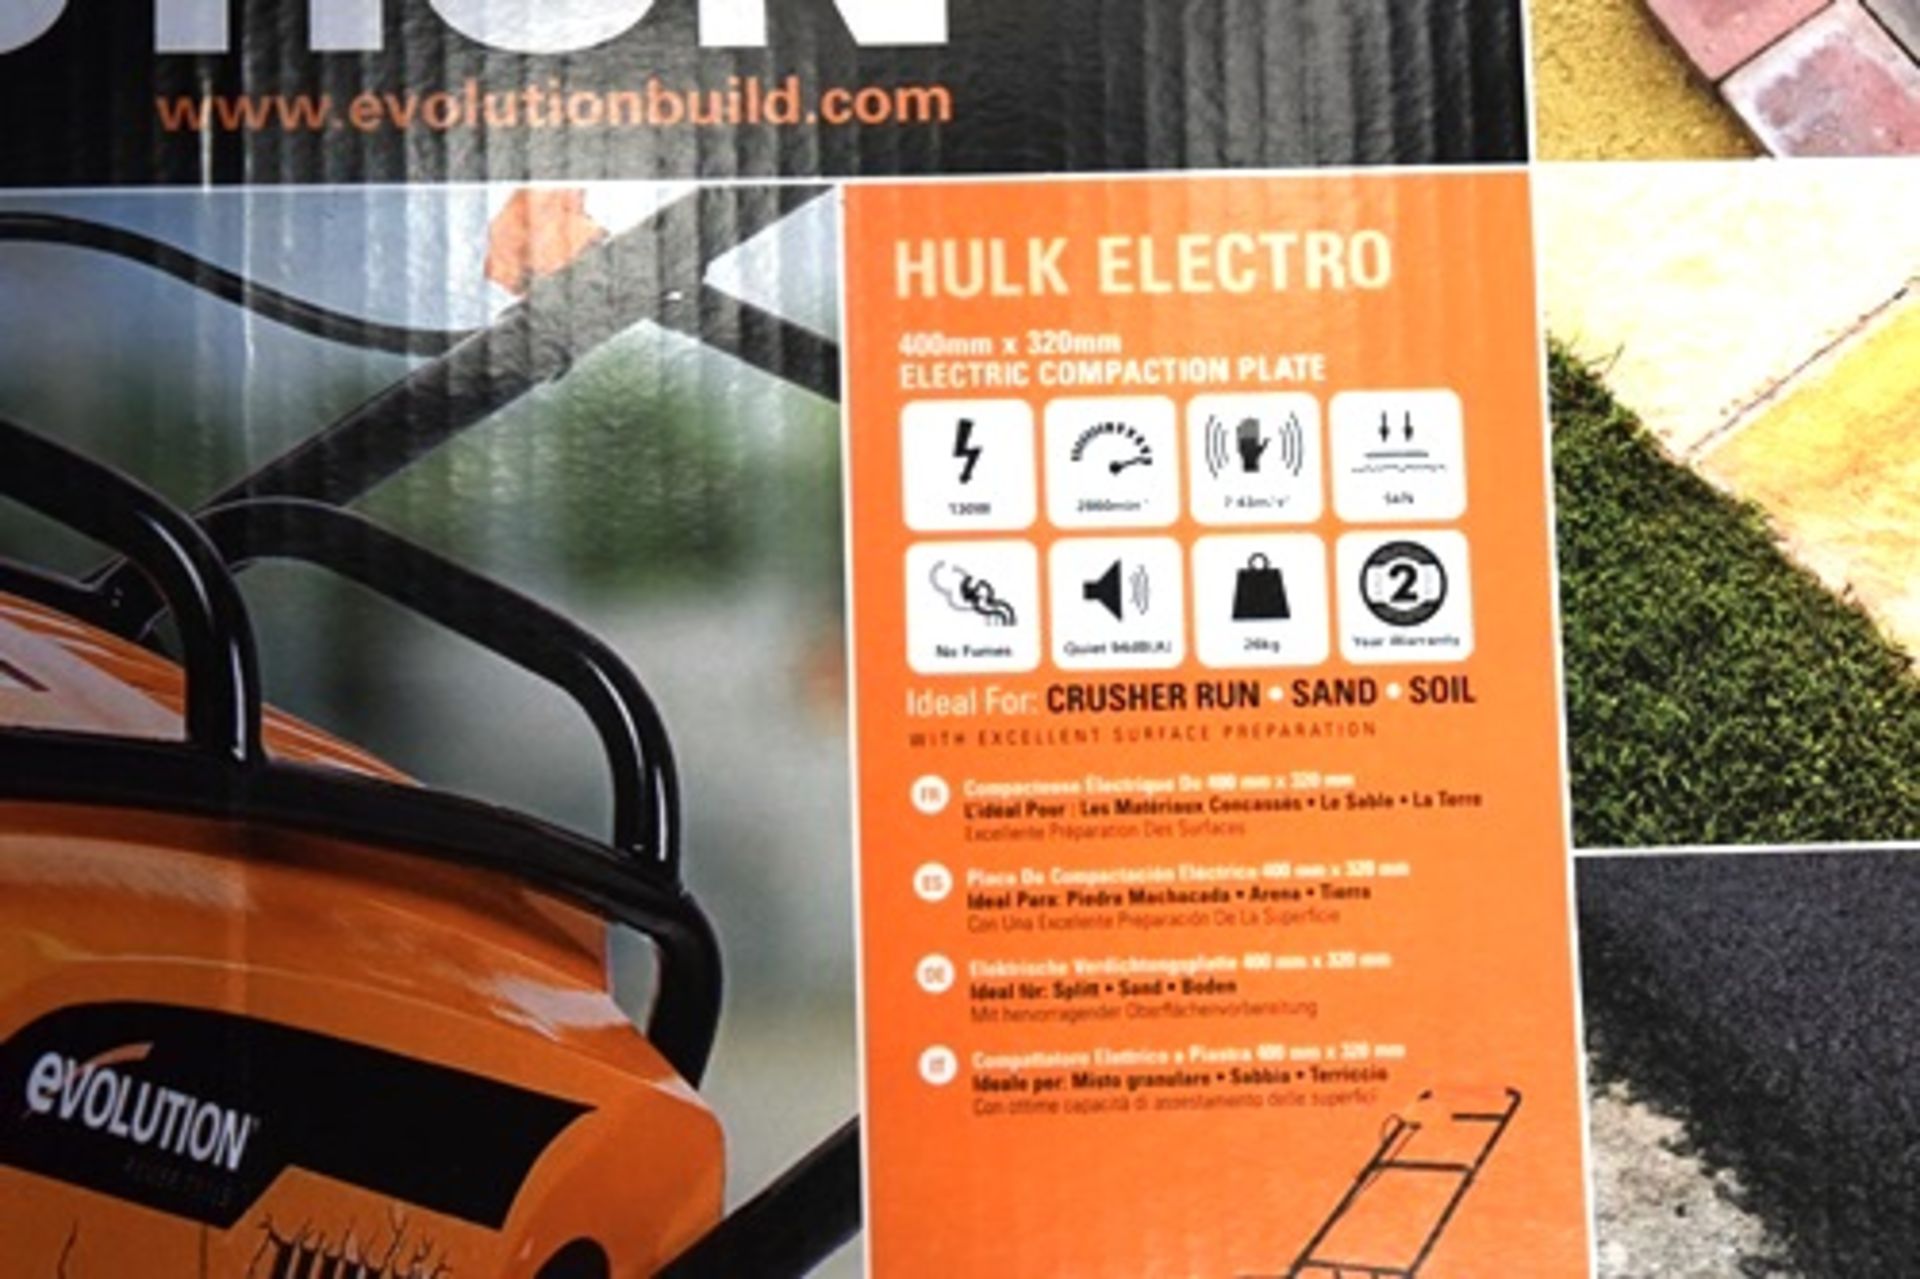 1 x Evolution Hulk electric compaction plate, plate size 400mm x 320mm, 230V - New in box (BRSW) - Image 2 of 3